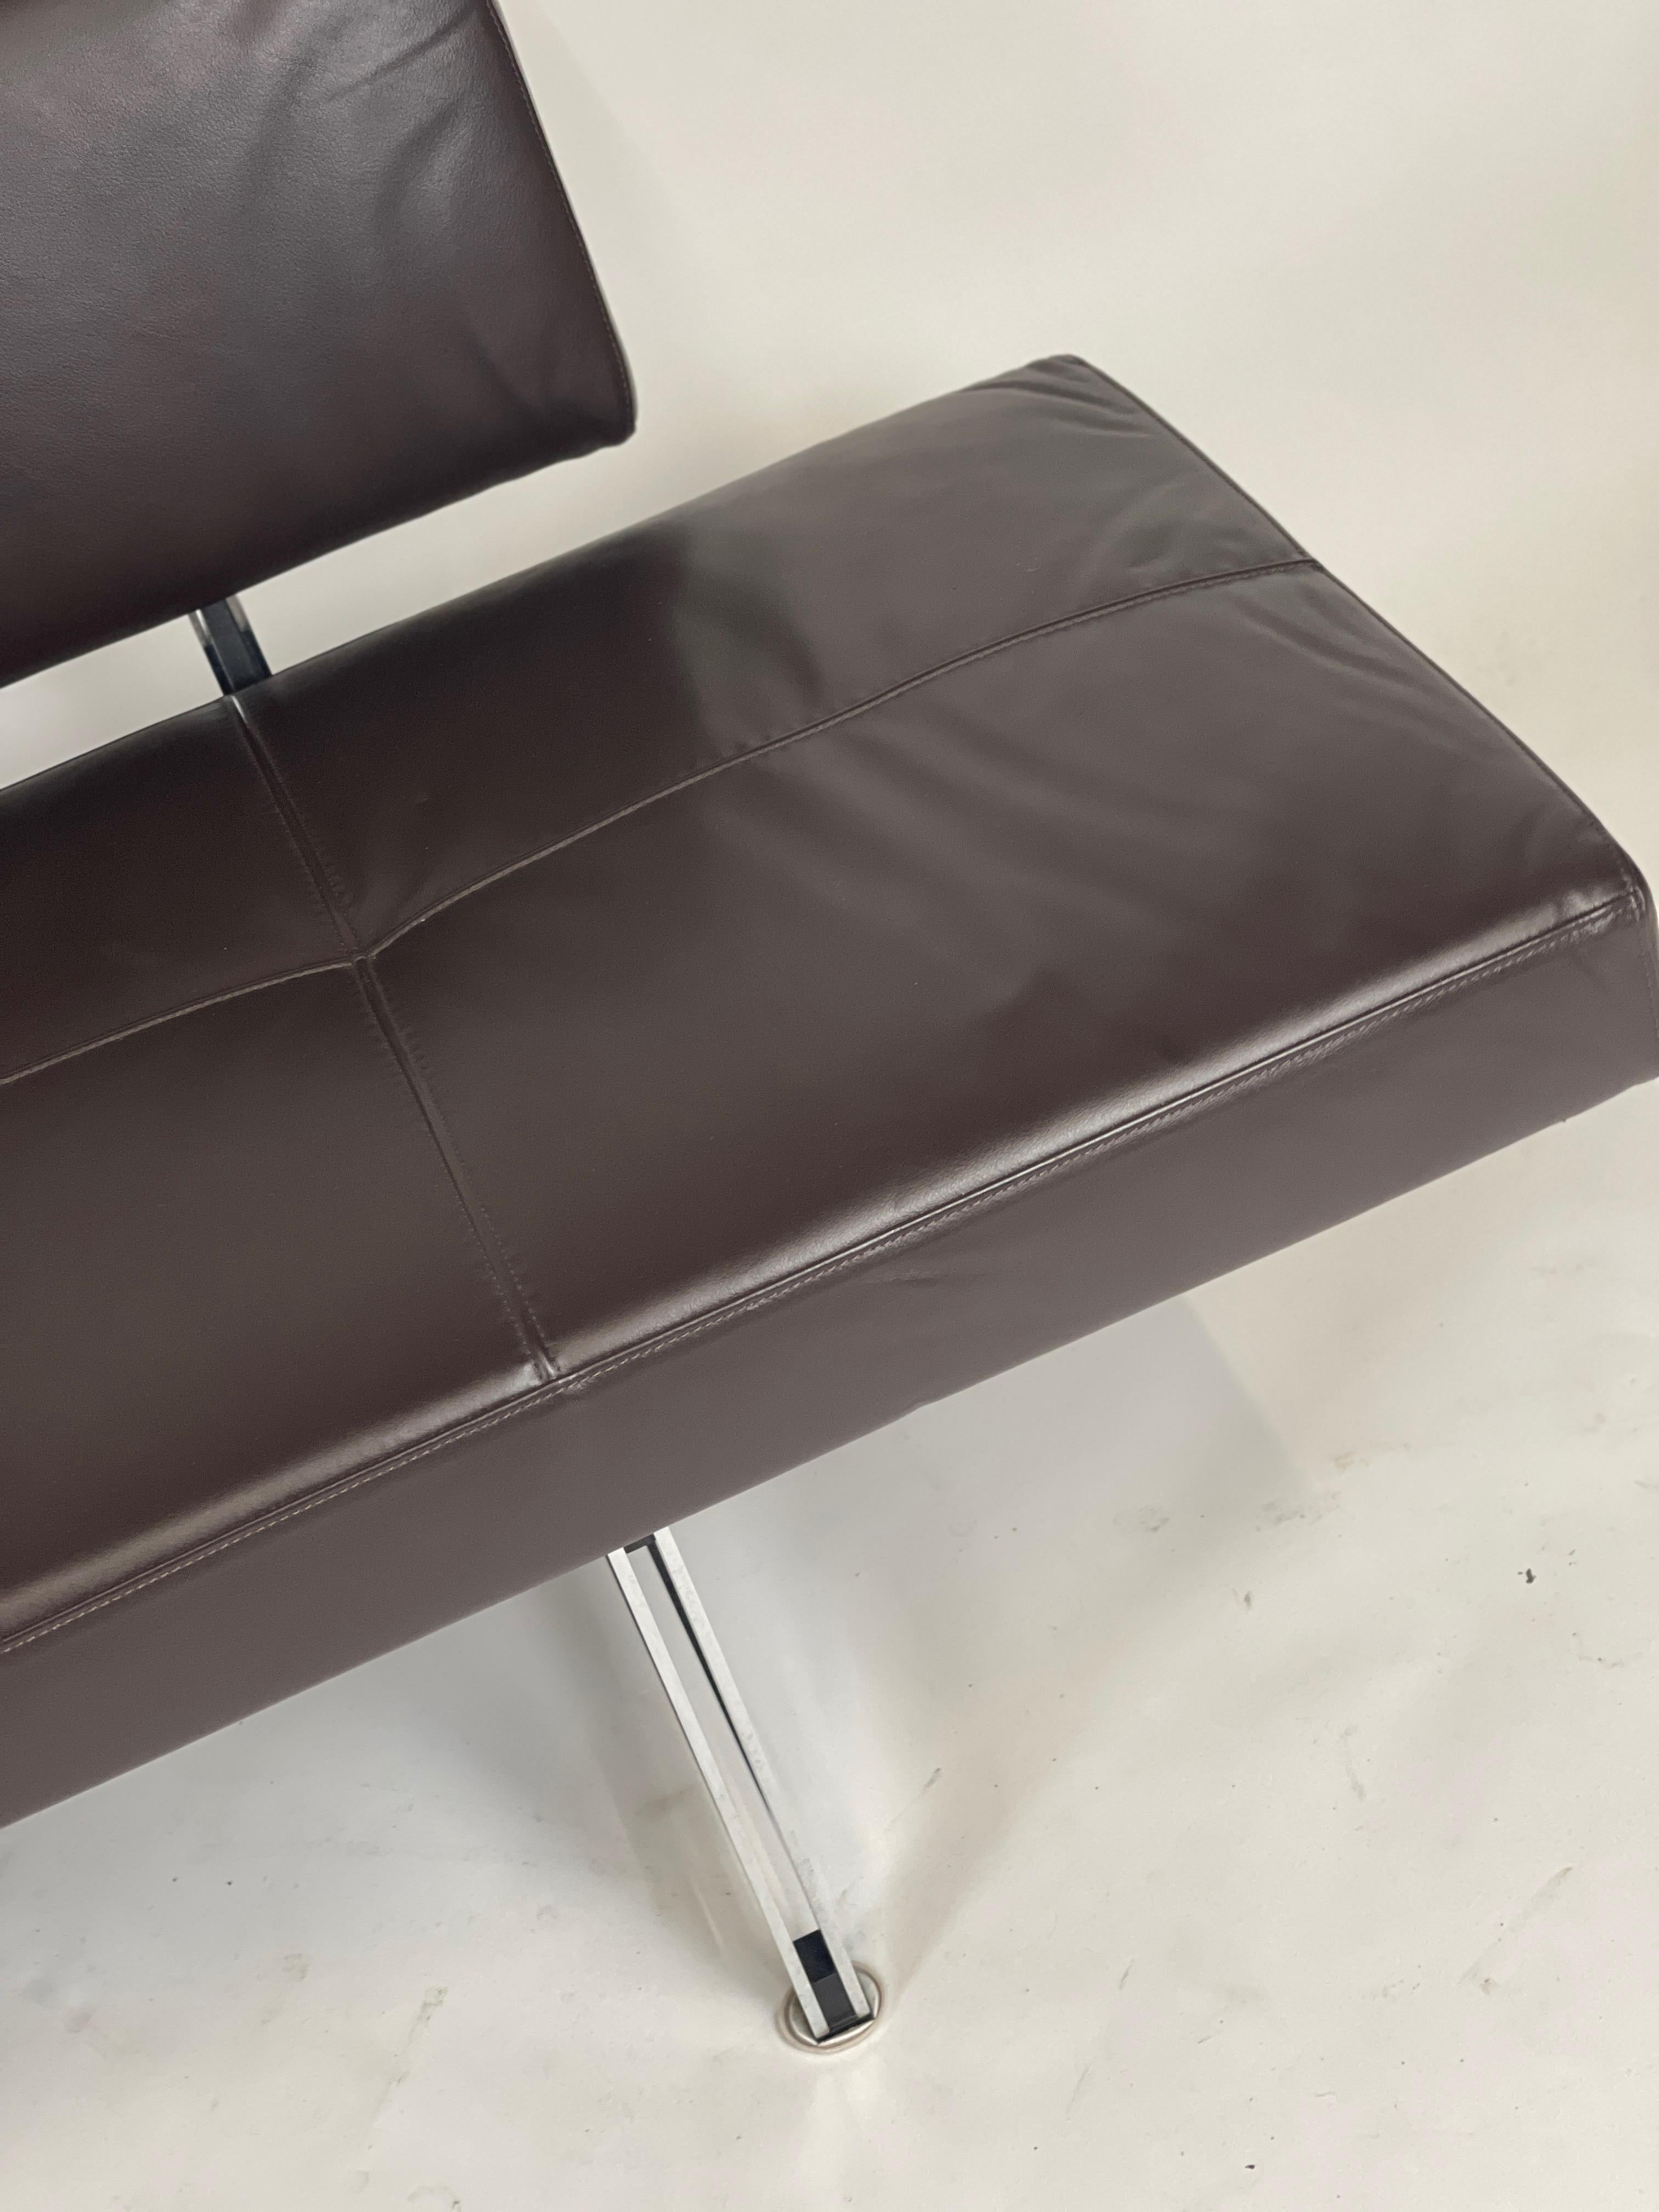 Sleek Norman Foster for Walter Knoll Leather Sofa / Daybed 'Foster 510' 1